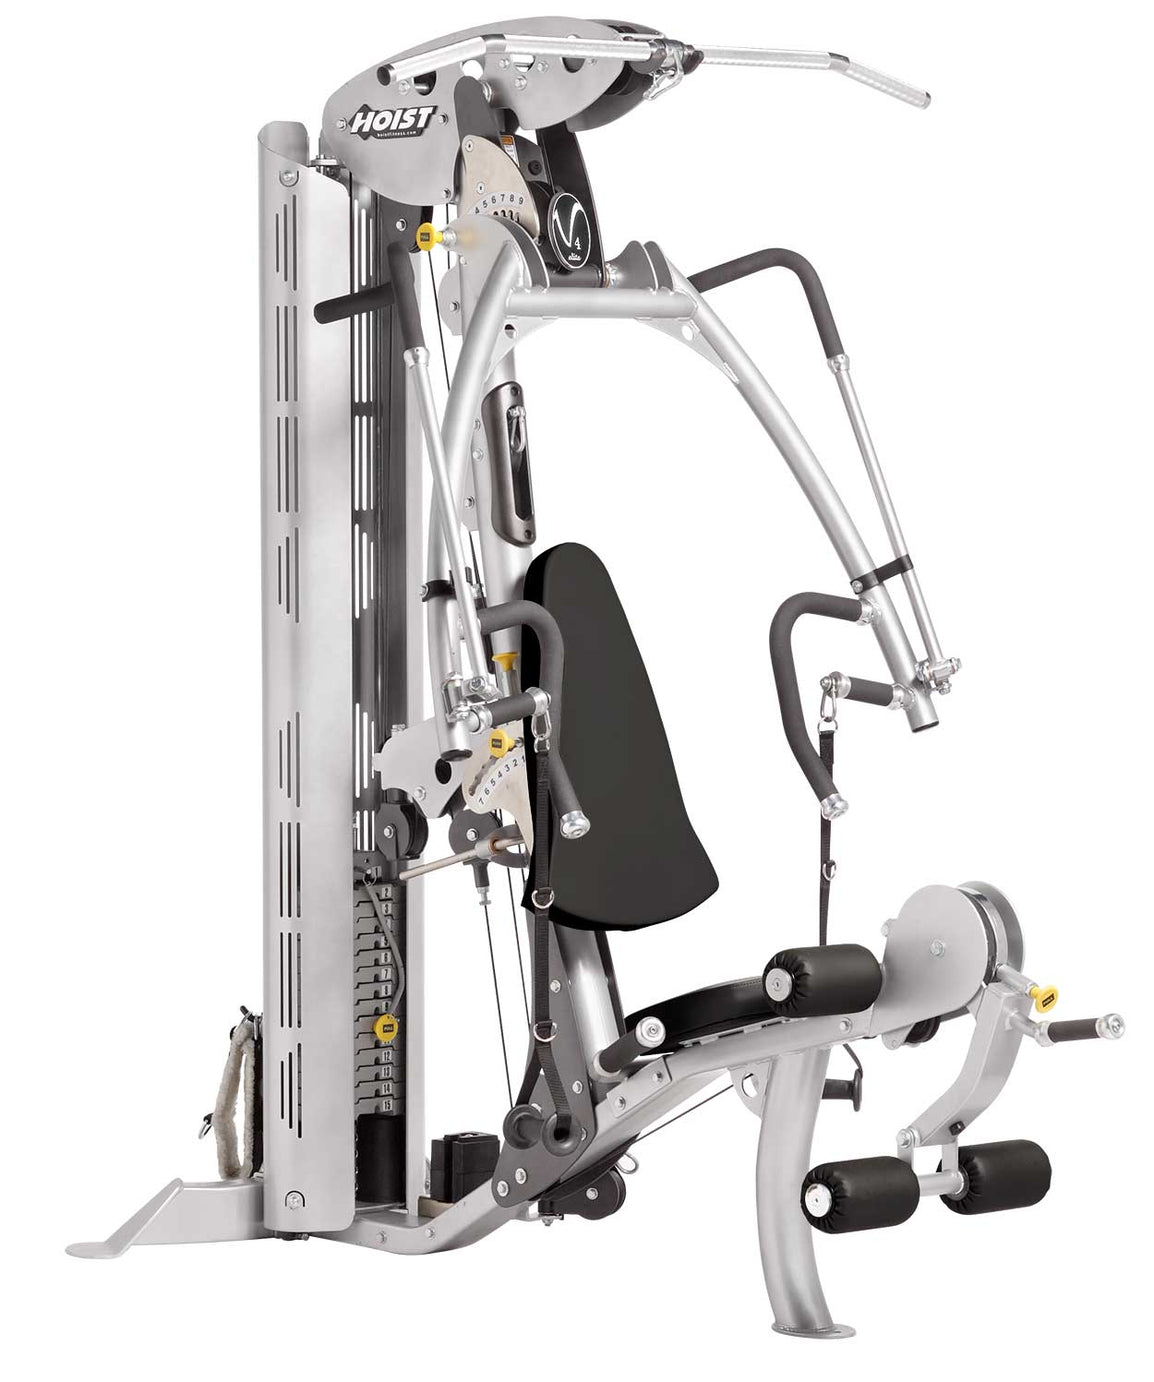 Find Custom and Top Quality ab shaper exercise equipment for All